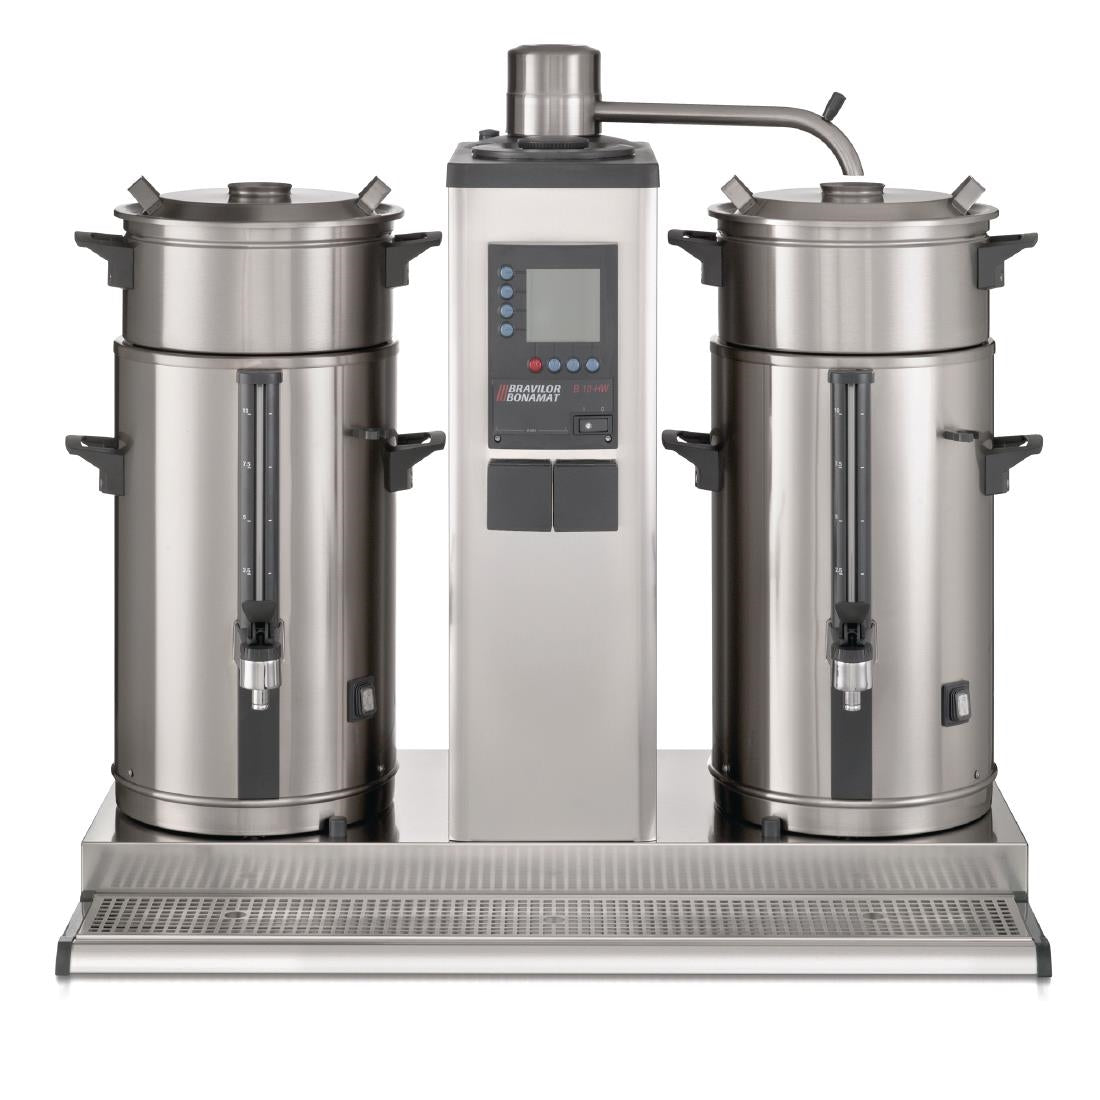 DC681 Bravilor B20 Bulk Coffee Brewer with 2x20Ltr Coffee Urns 3 Phase JD Catering Equipment Solutions Ltd